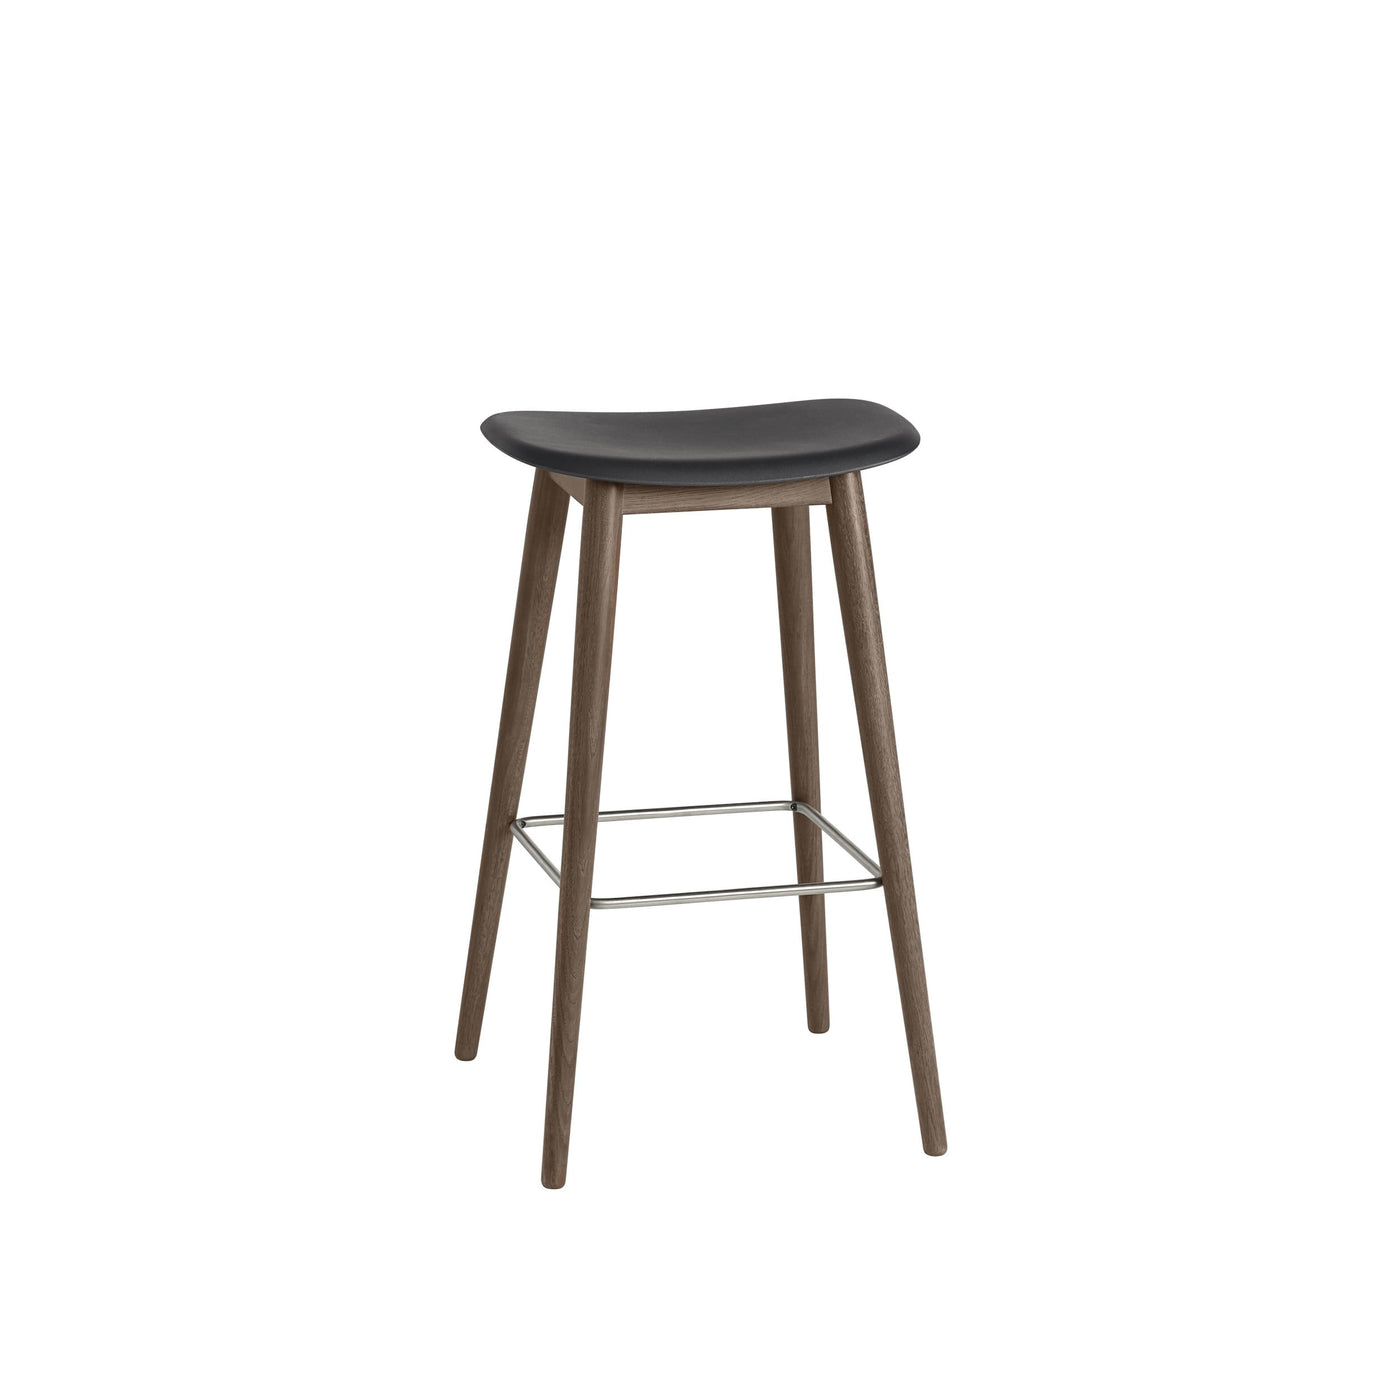 Muuto Fiber counter Stool 75cm with a wood base. Shop online at someday designs. #colour_black